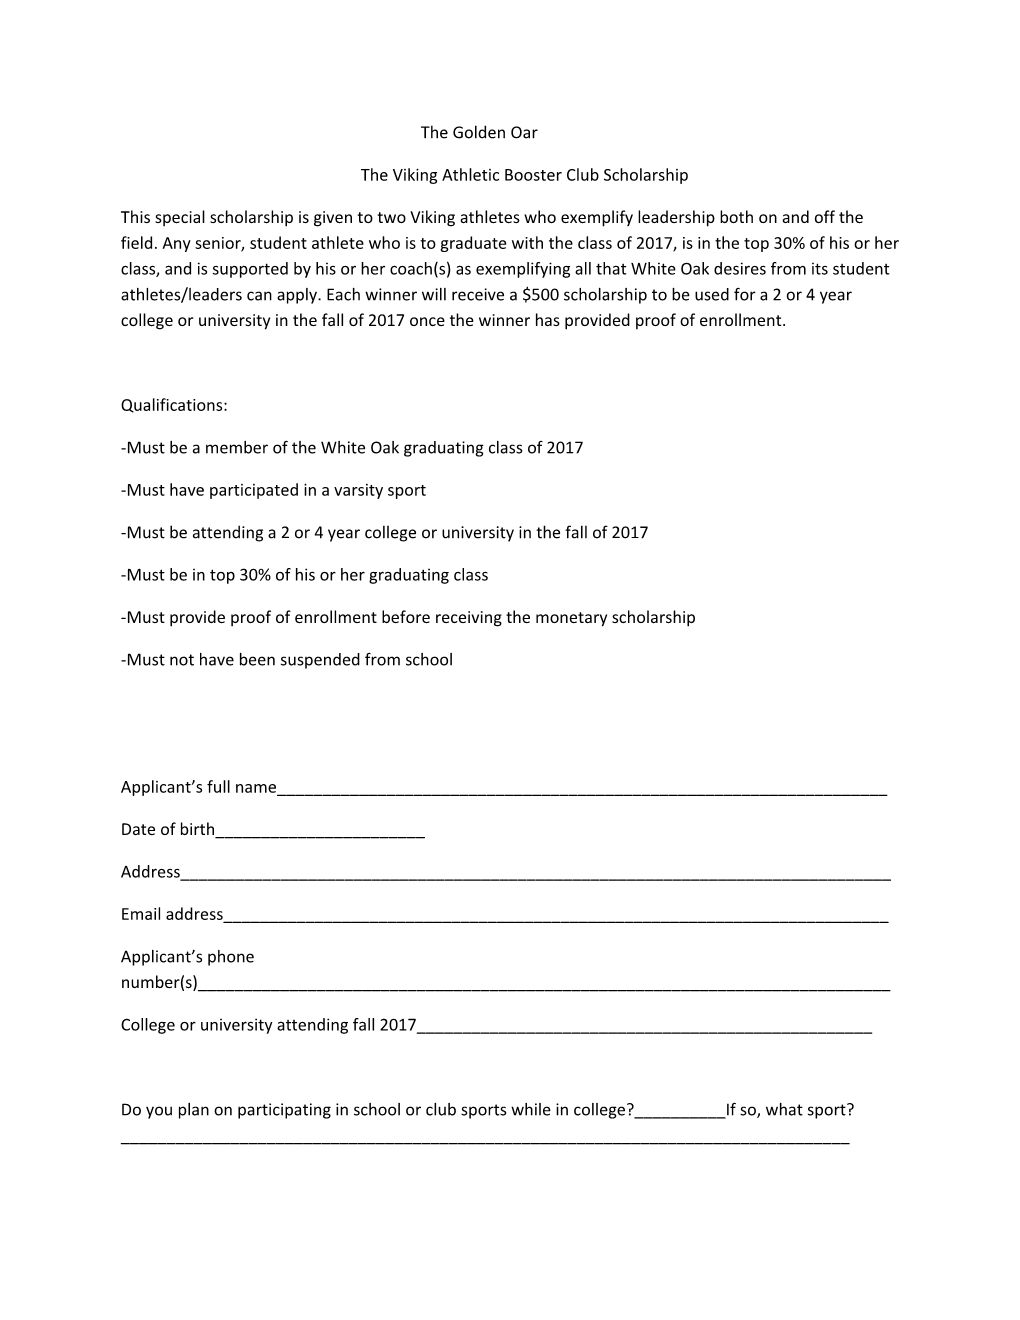 The Viking Athletic Booster Club Scholarship